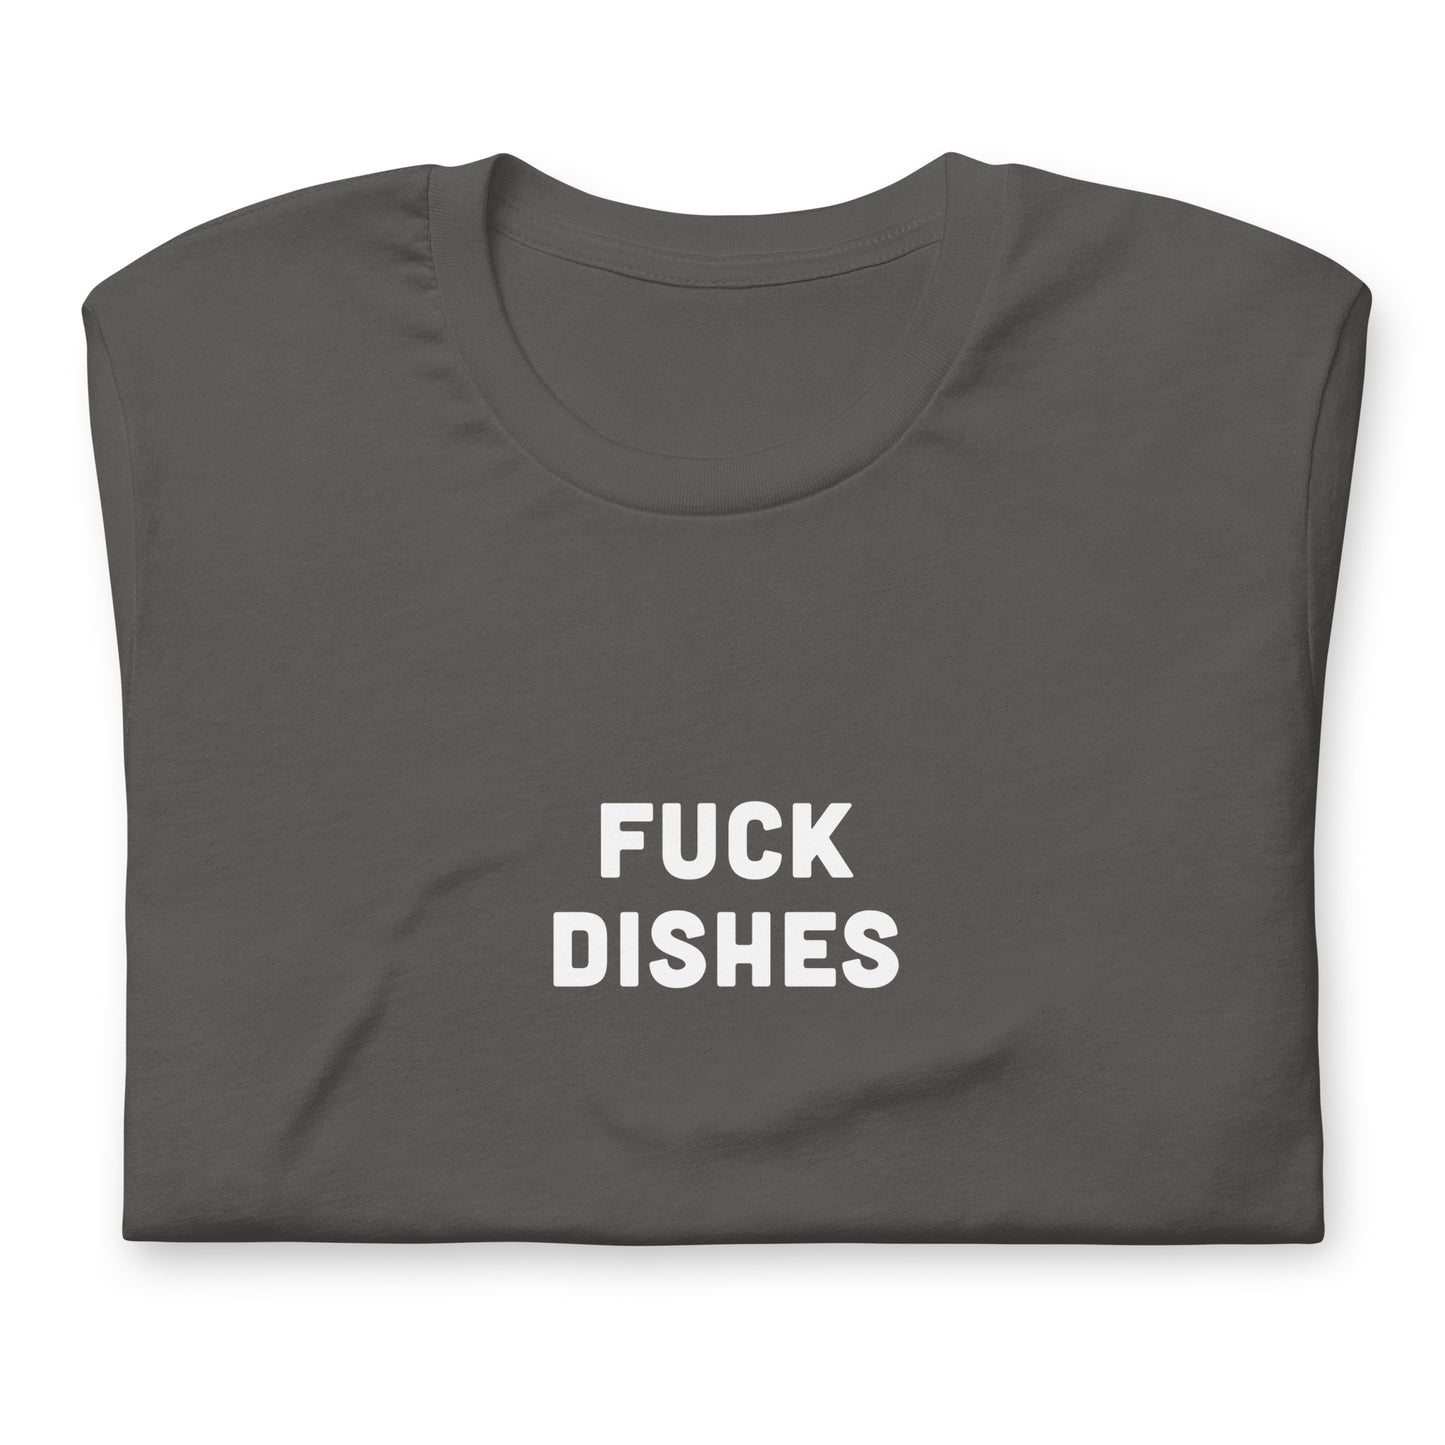 Fuck Dishes T-Shirt Size S Color Navy